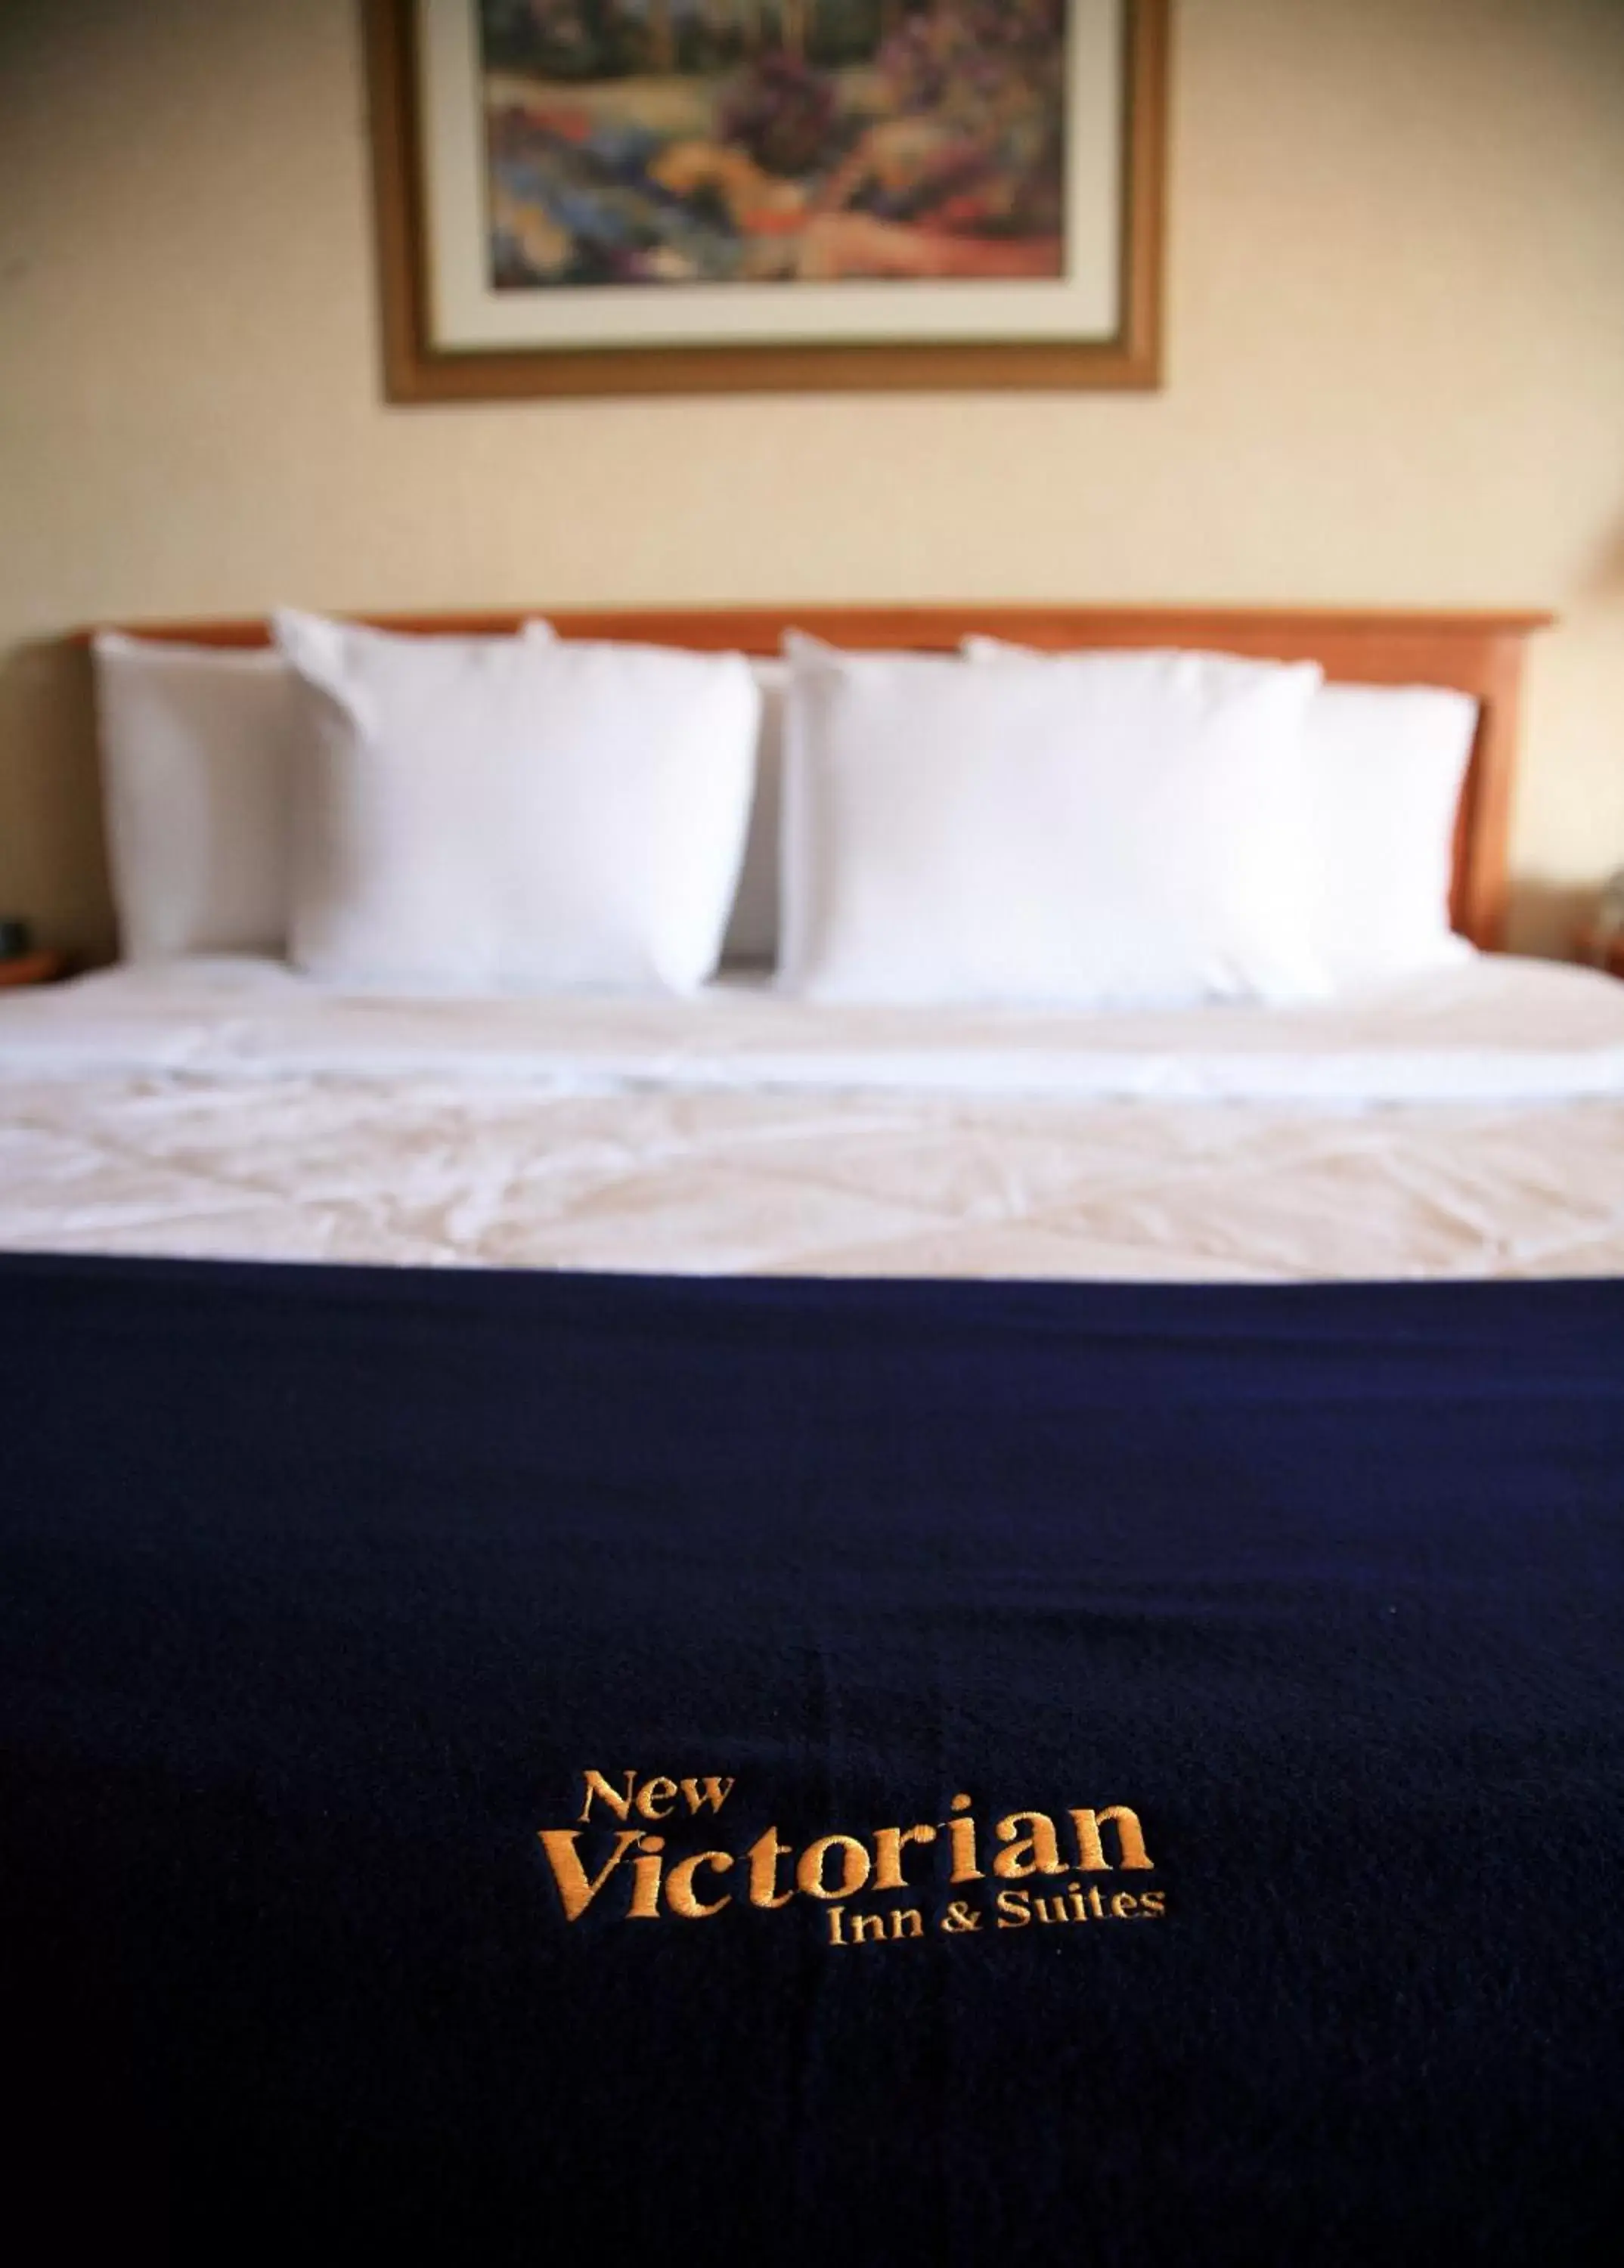 Bed in New Victorian Inn & Suites Omaha